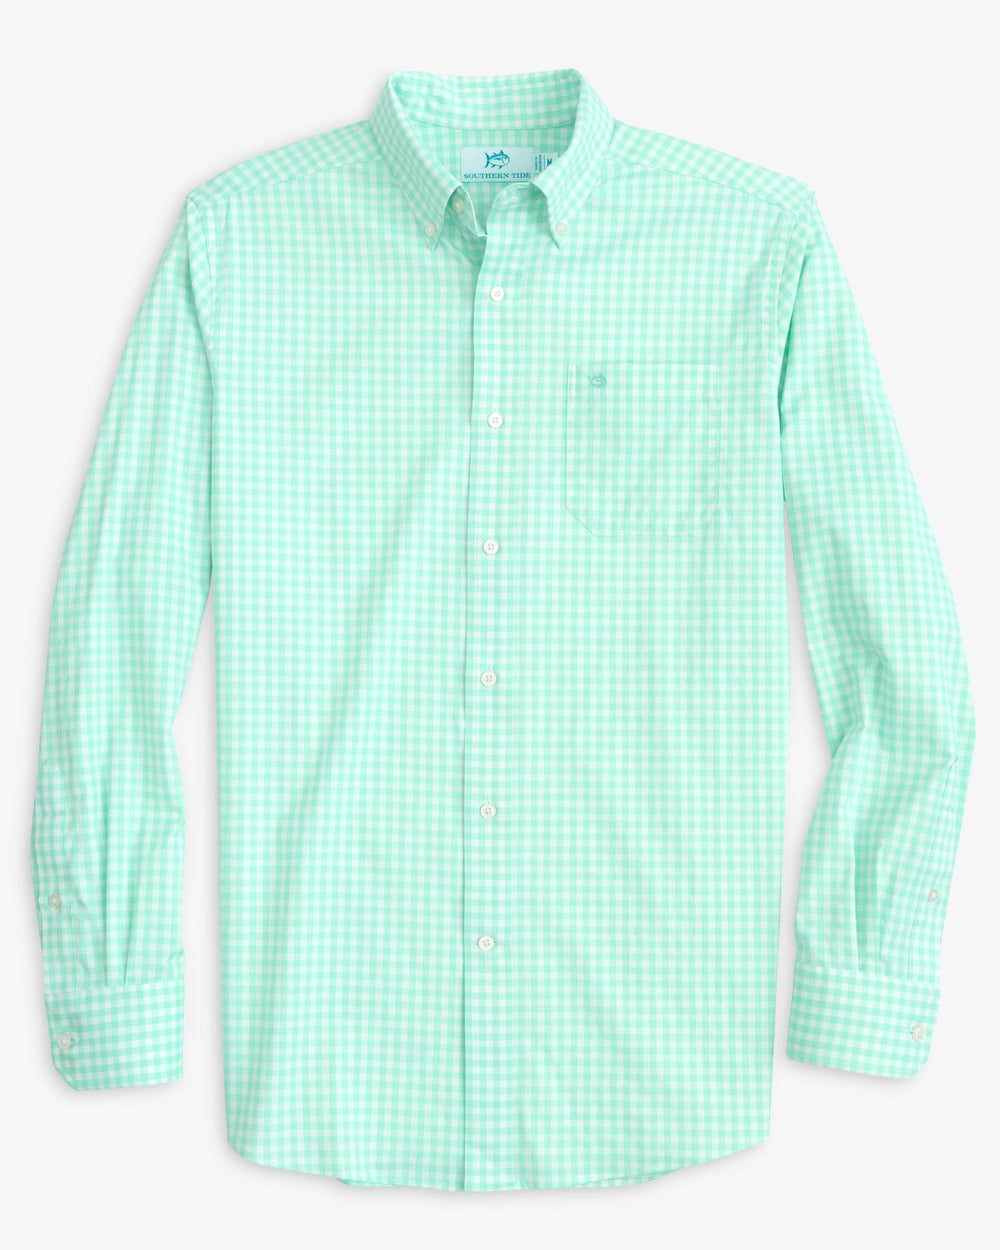 The front view of the Southern Tide Heather Hartwell Plaid Intercoastal Sport Shirt by Southern Tide - Heather Mint